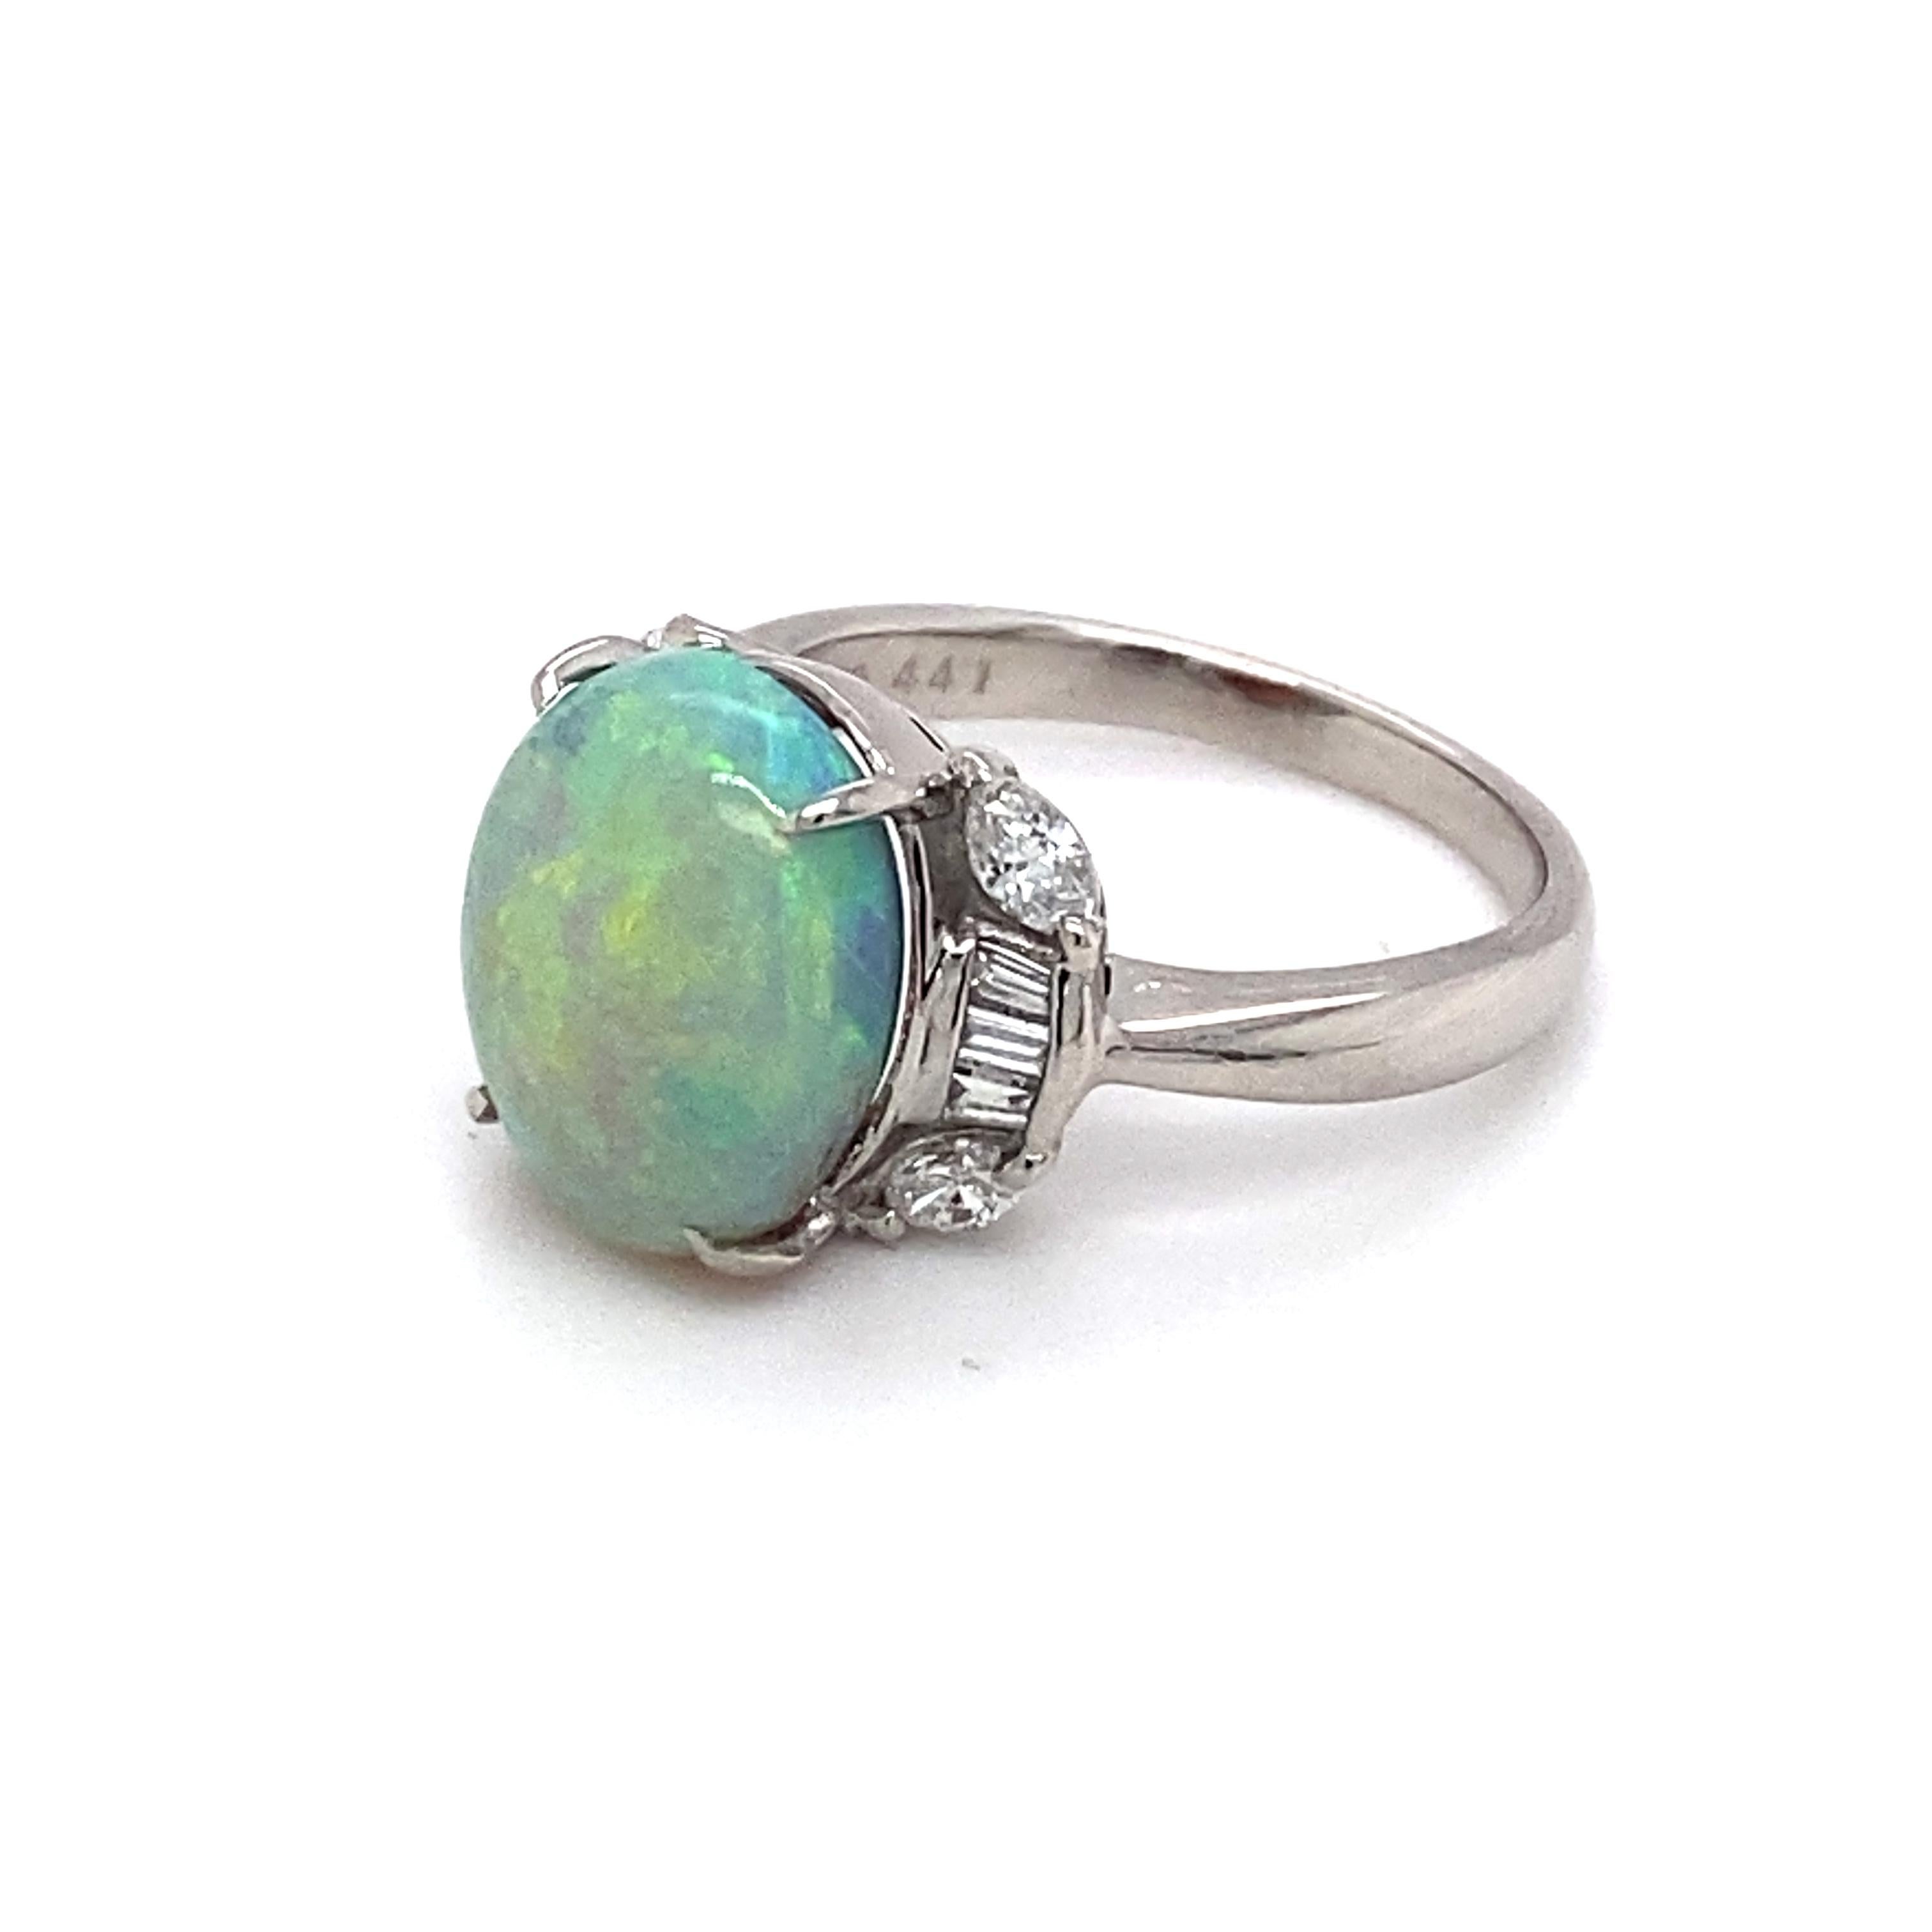 Round Cut 1950s 4.41 Carat Opal and Diamond Ring in Platinum